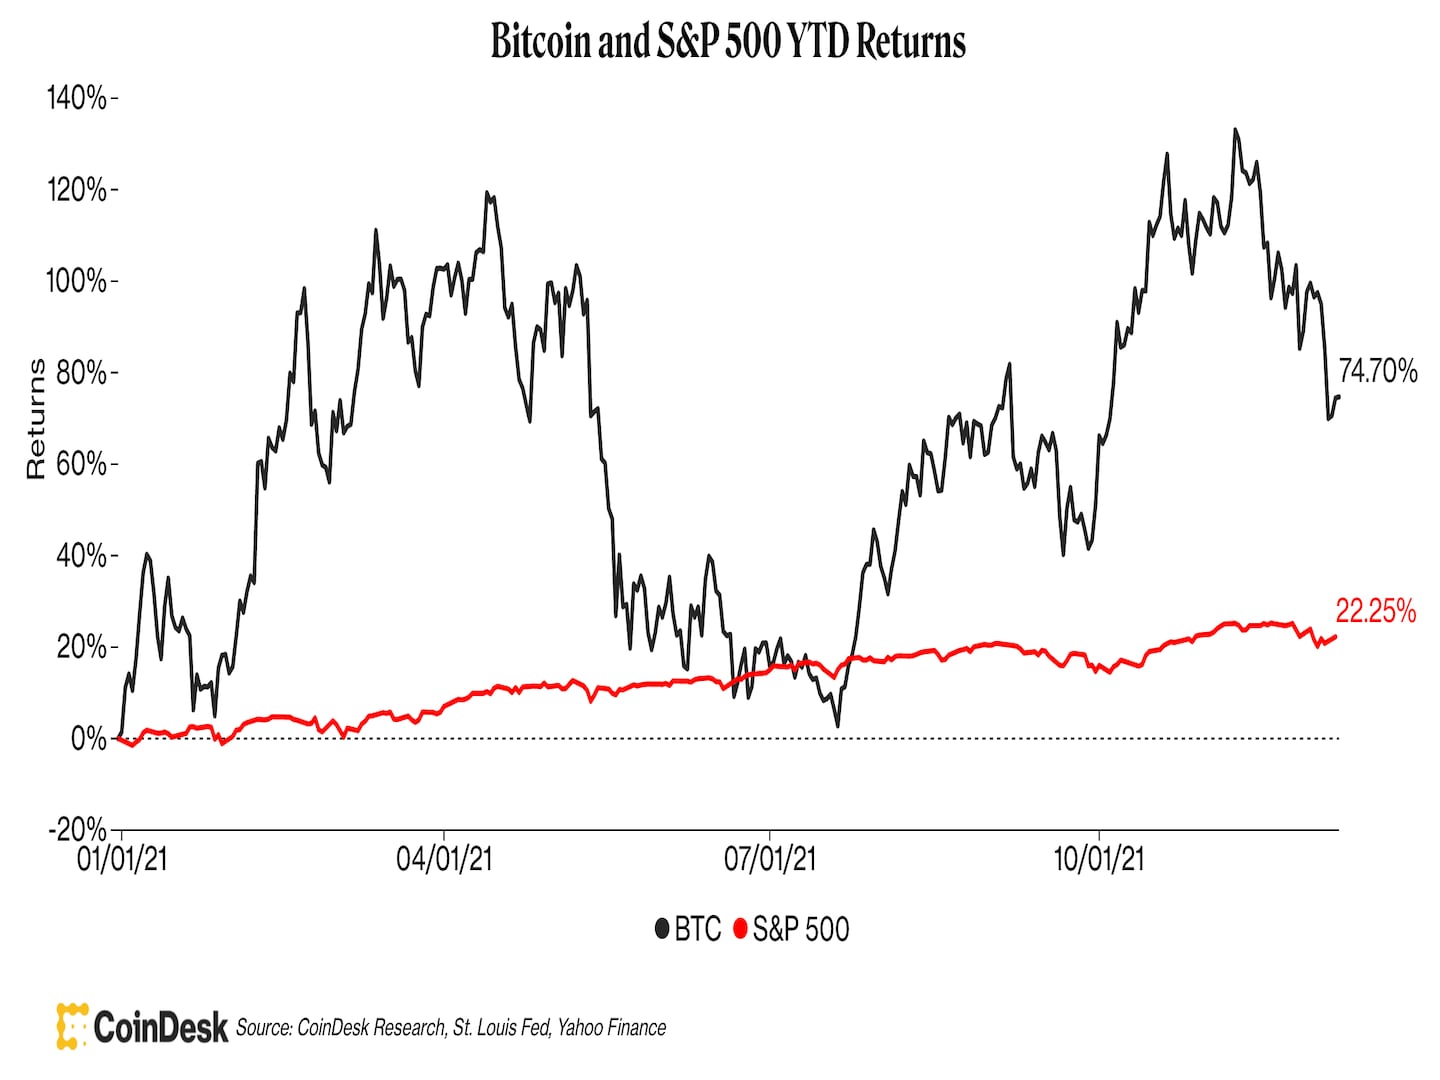 Bitcoin and S&P 500 year-to-date returns (CoinDesk)